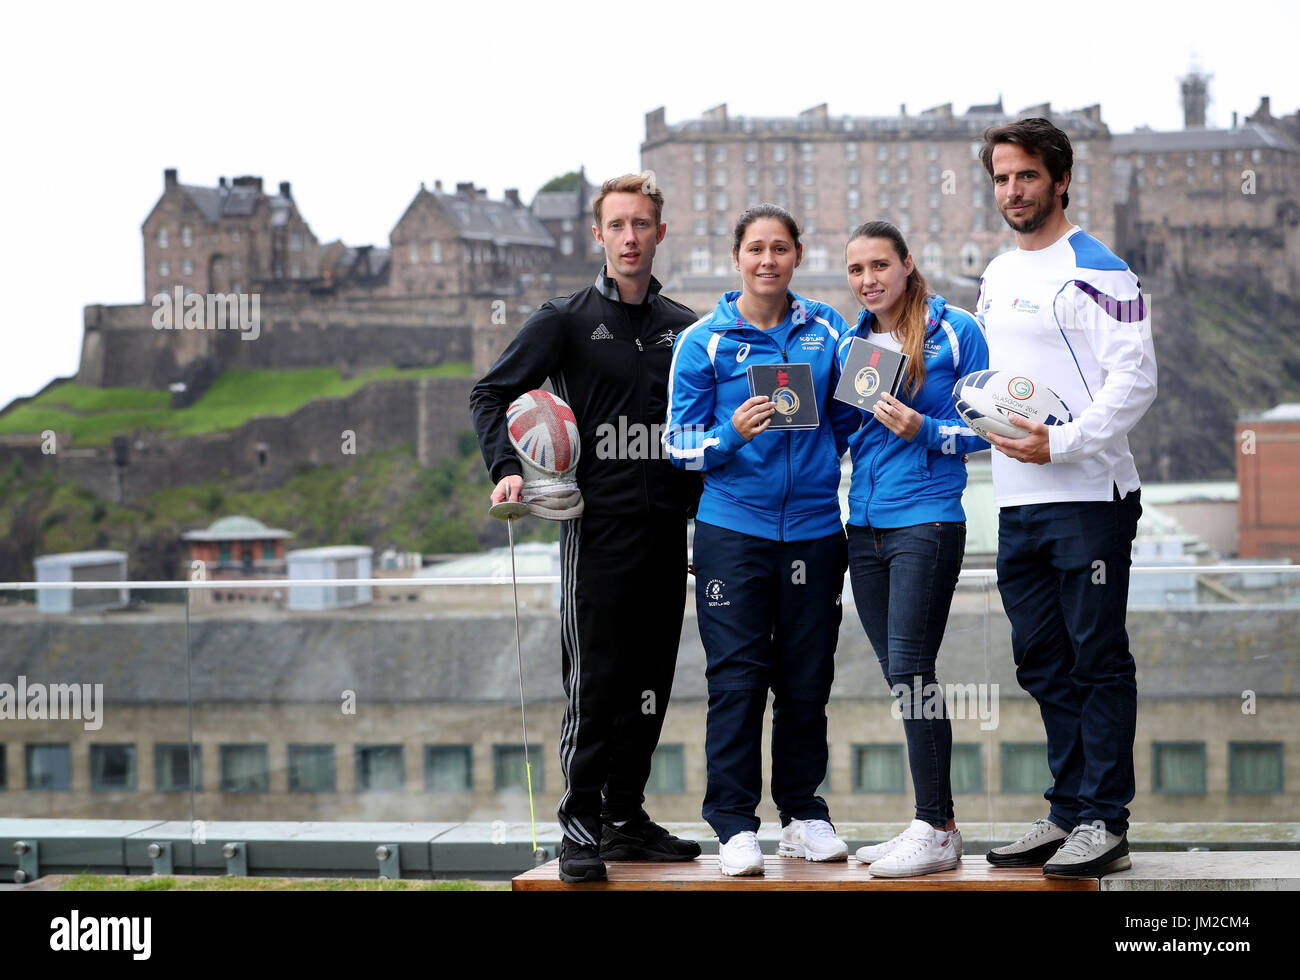 Scotland's leading athletes (from left) British Fencing Champion Keith Cook, Commonwealth gold-winning Judo players Louise and Kimberley Renicks with Rugby 7s captain Colin Gregor have been taking part in a Winning Scotland Foundation charity programme in Edinburgh to receive training in becoming sporting role models to help young people set and achieve personal goals. Stock Photo